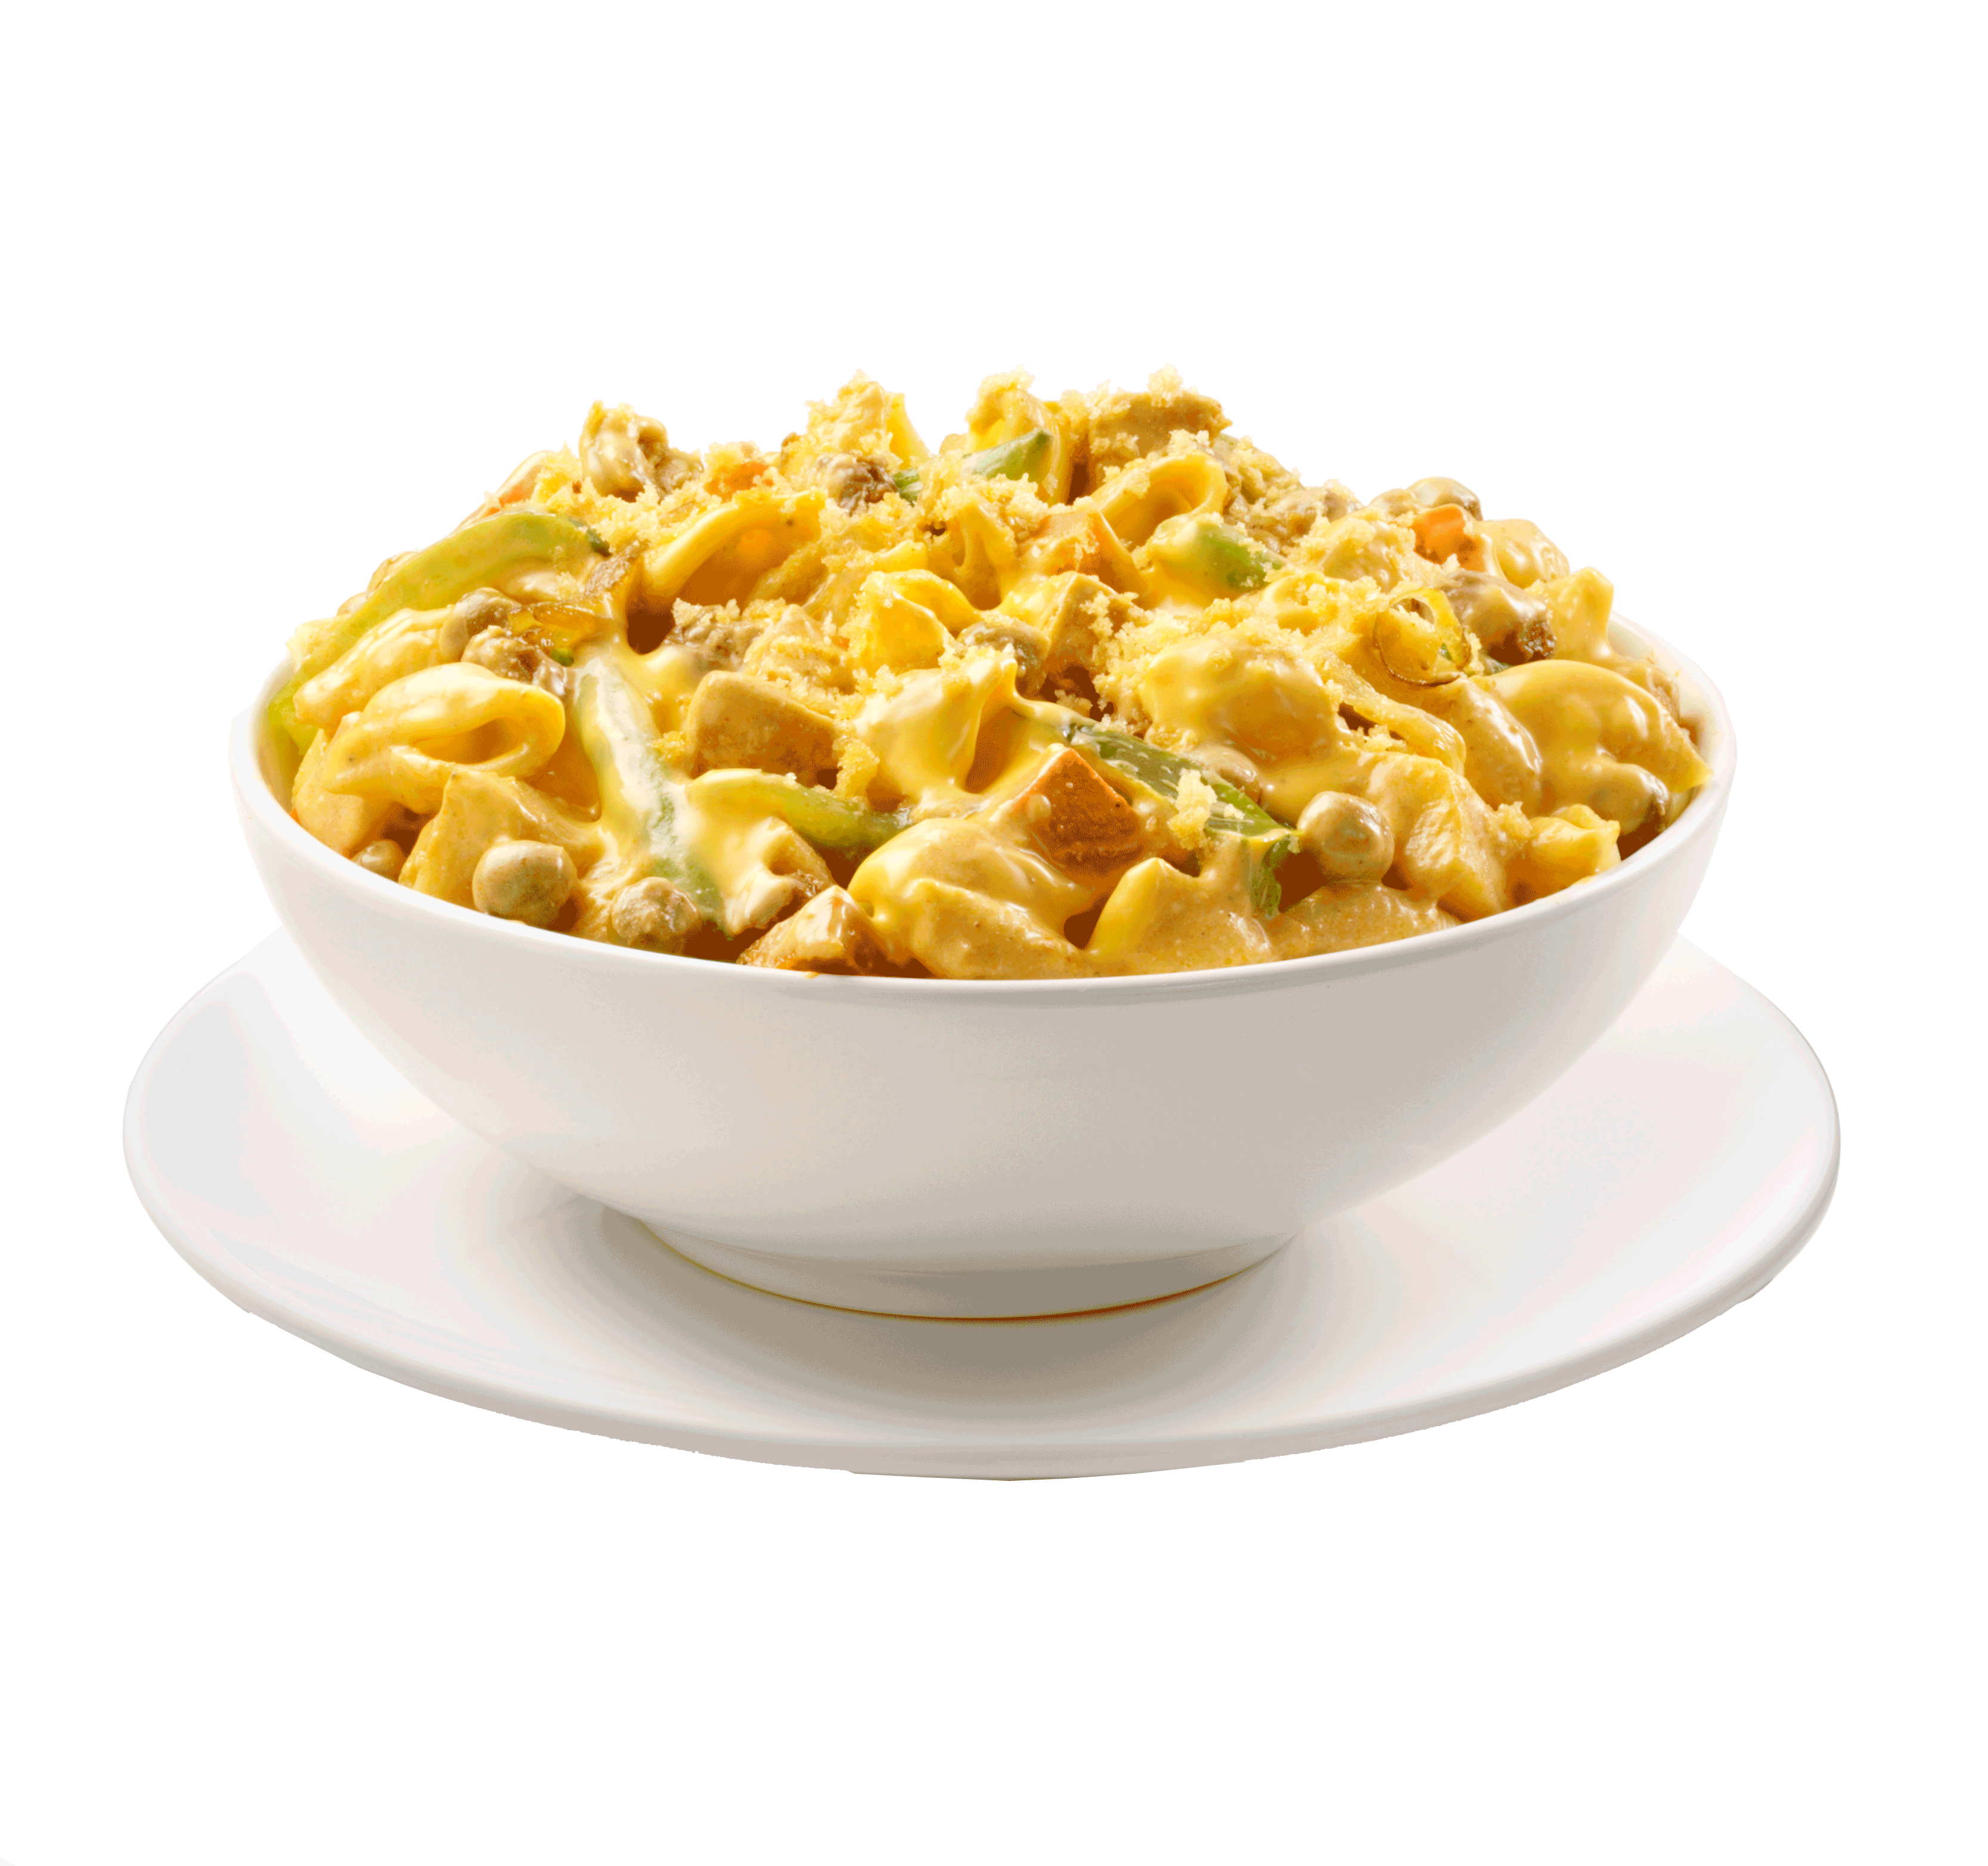 Macaroni And Cheese. Https://upload.wikimedia Pluspng Pluspng.com/wikipedia/commons/9 - Mac N Cheese, Transparent background PNG HD thumbnail